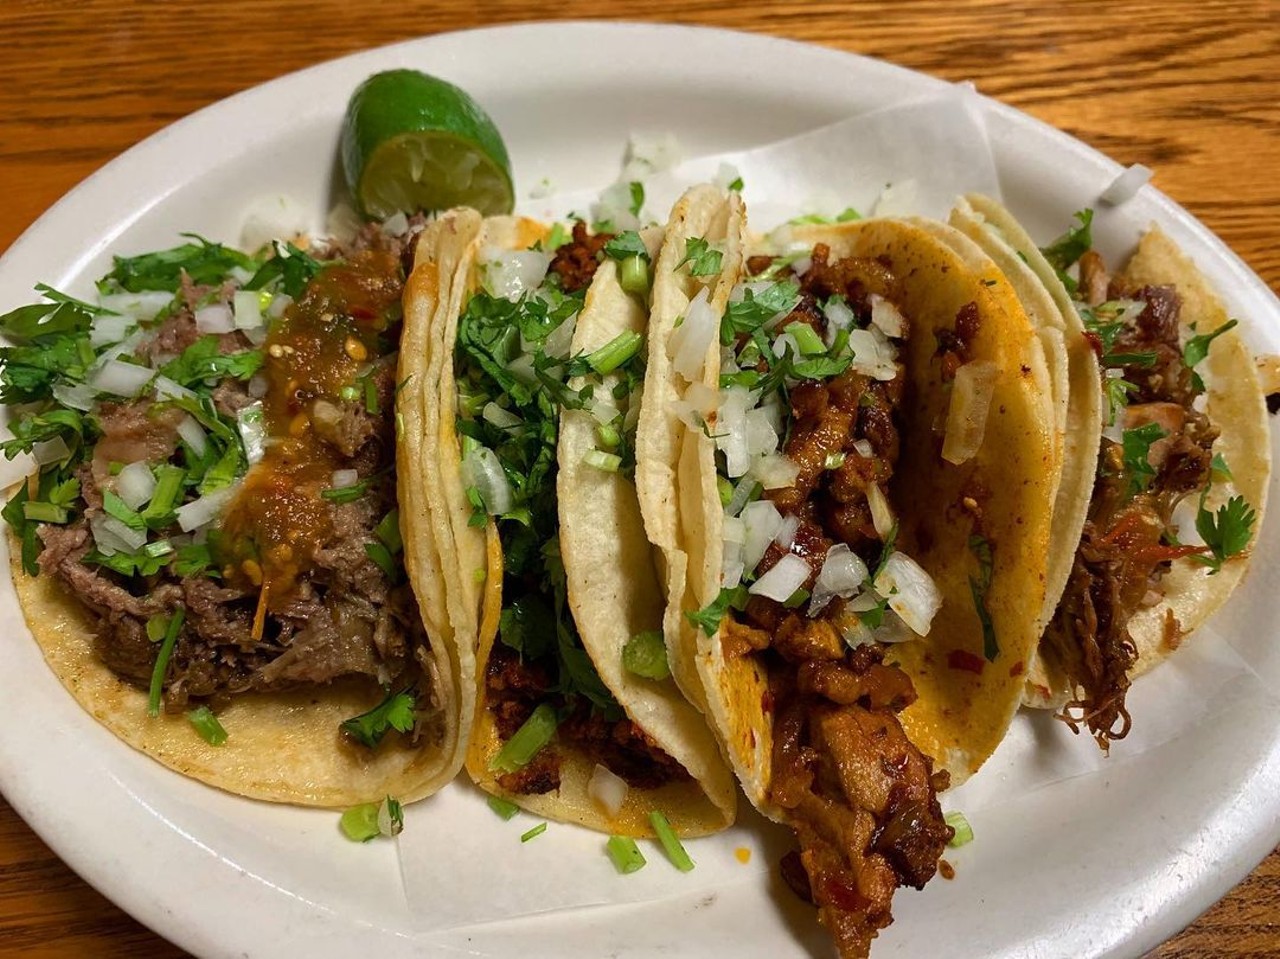 Taqueria Lupitas
3443 Bagley St., Detroit; 313-843-1105
Though located smack dab on Mexicantown's gringo-frequented strip, Lupita's caters to a back-home crowd, with rock-bottom prices. You can get a taco lunch with two tacos for $8.